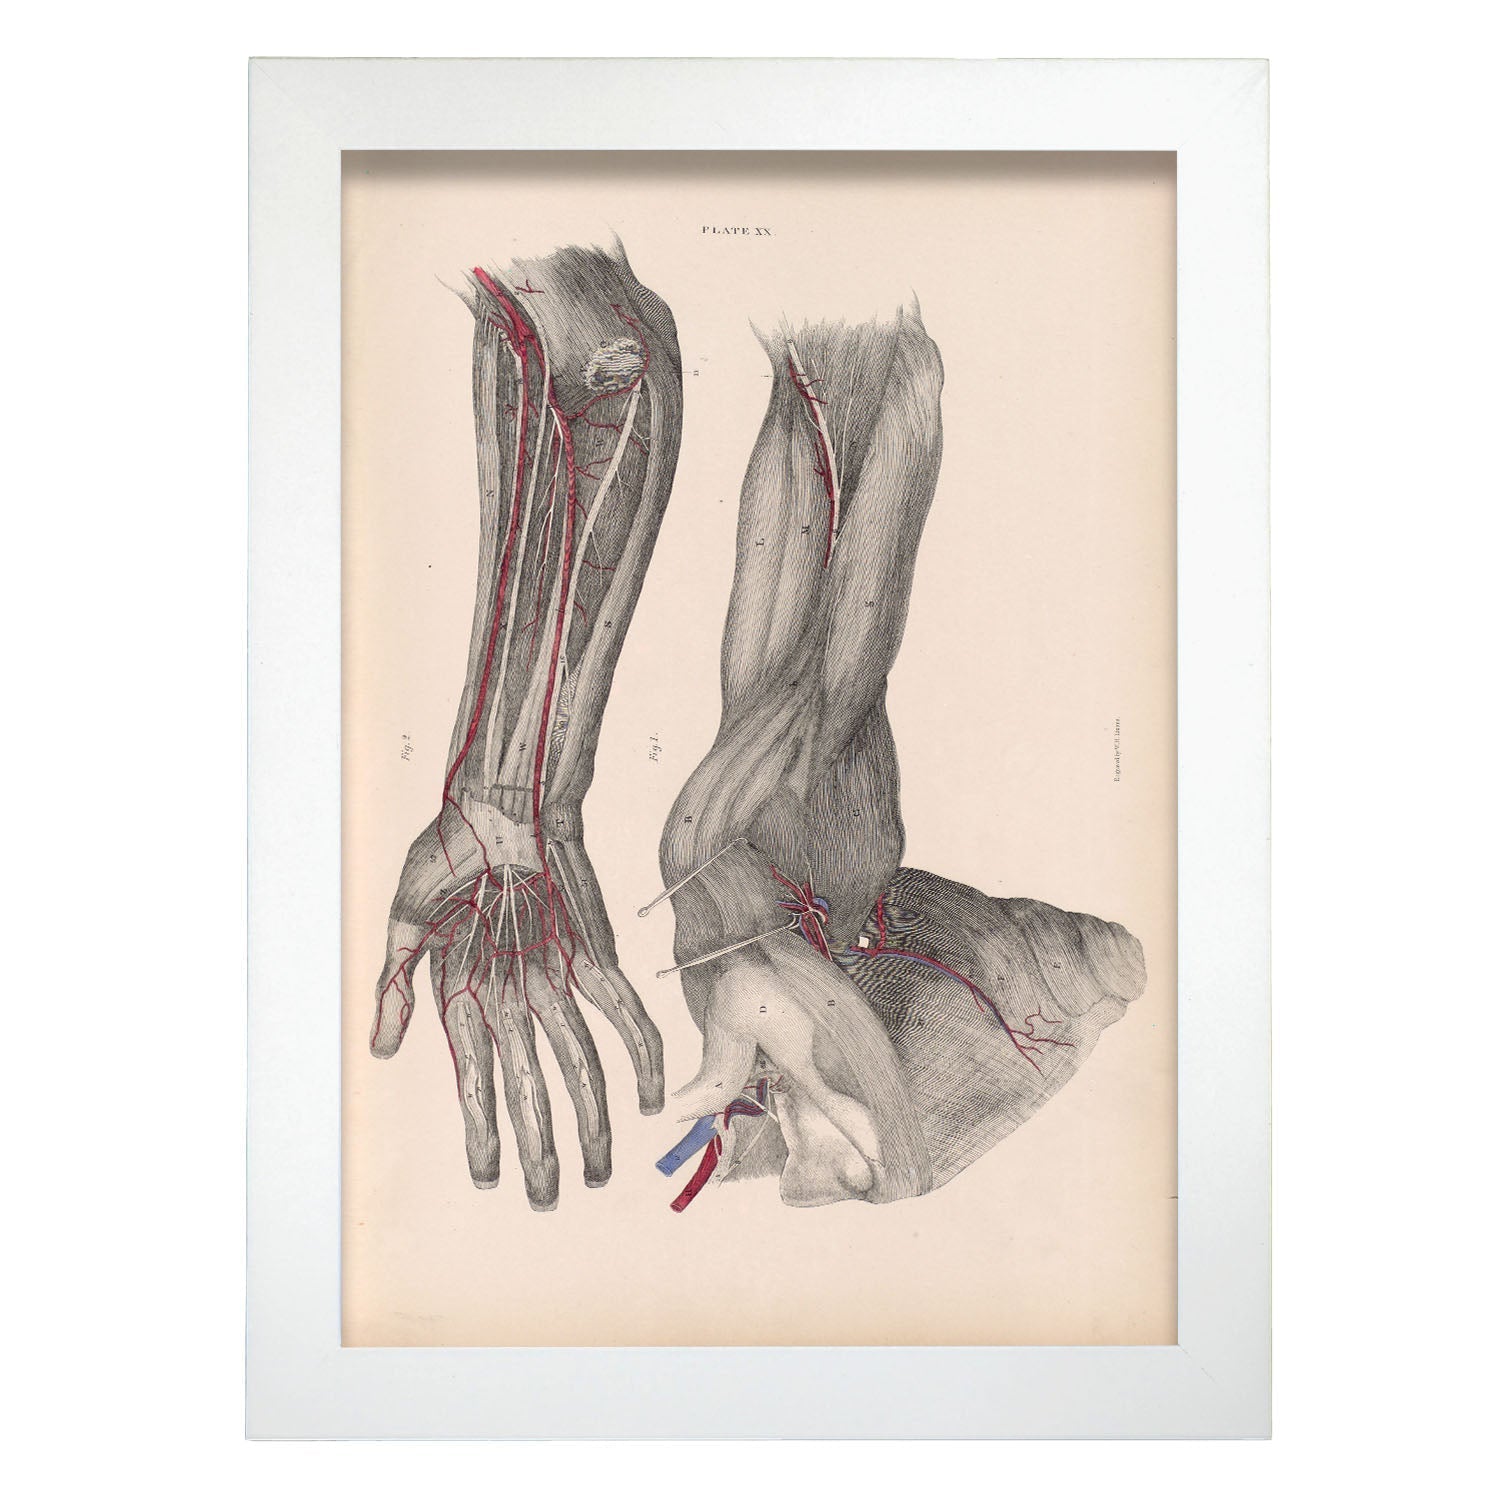 Dissection of the arm and hand-Artwork-Nacnic-A4-Marco Blanco-Nacnic Estudio SL